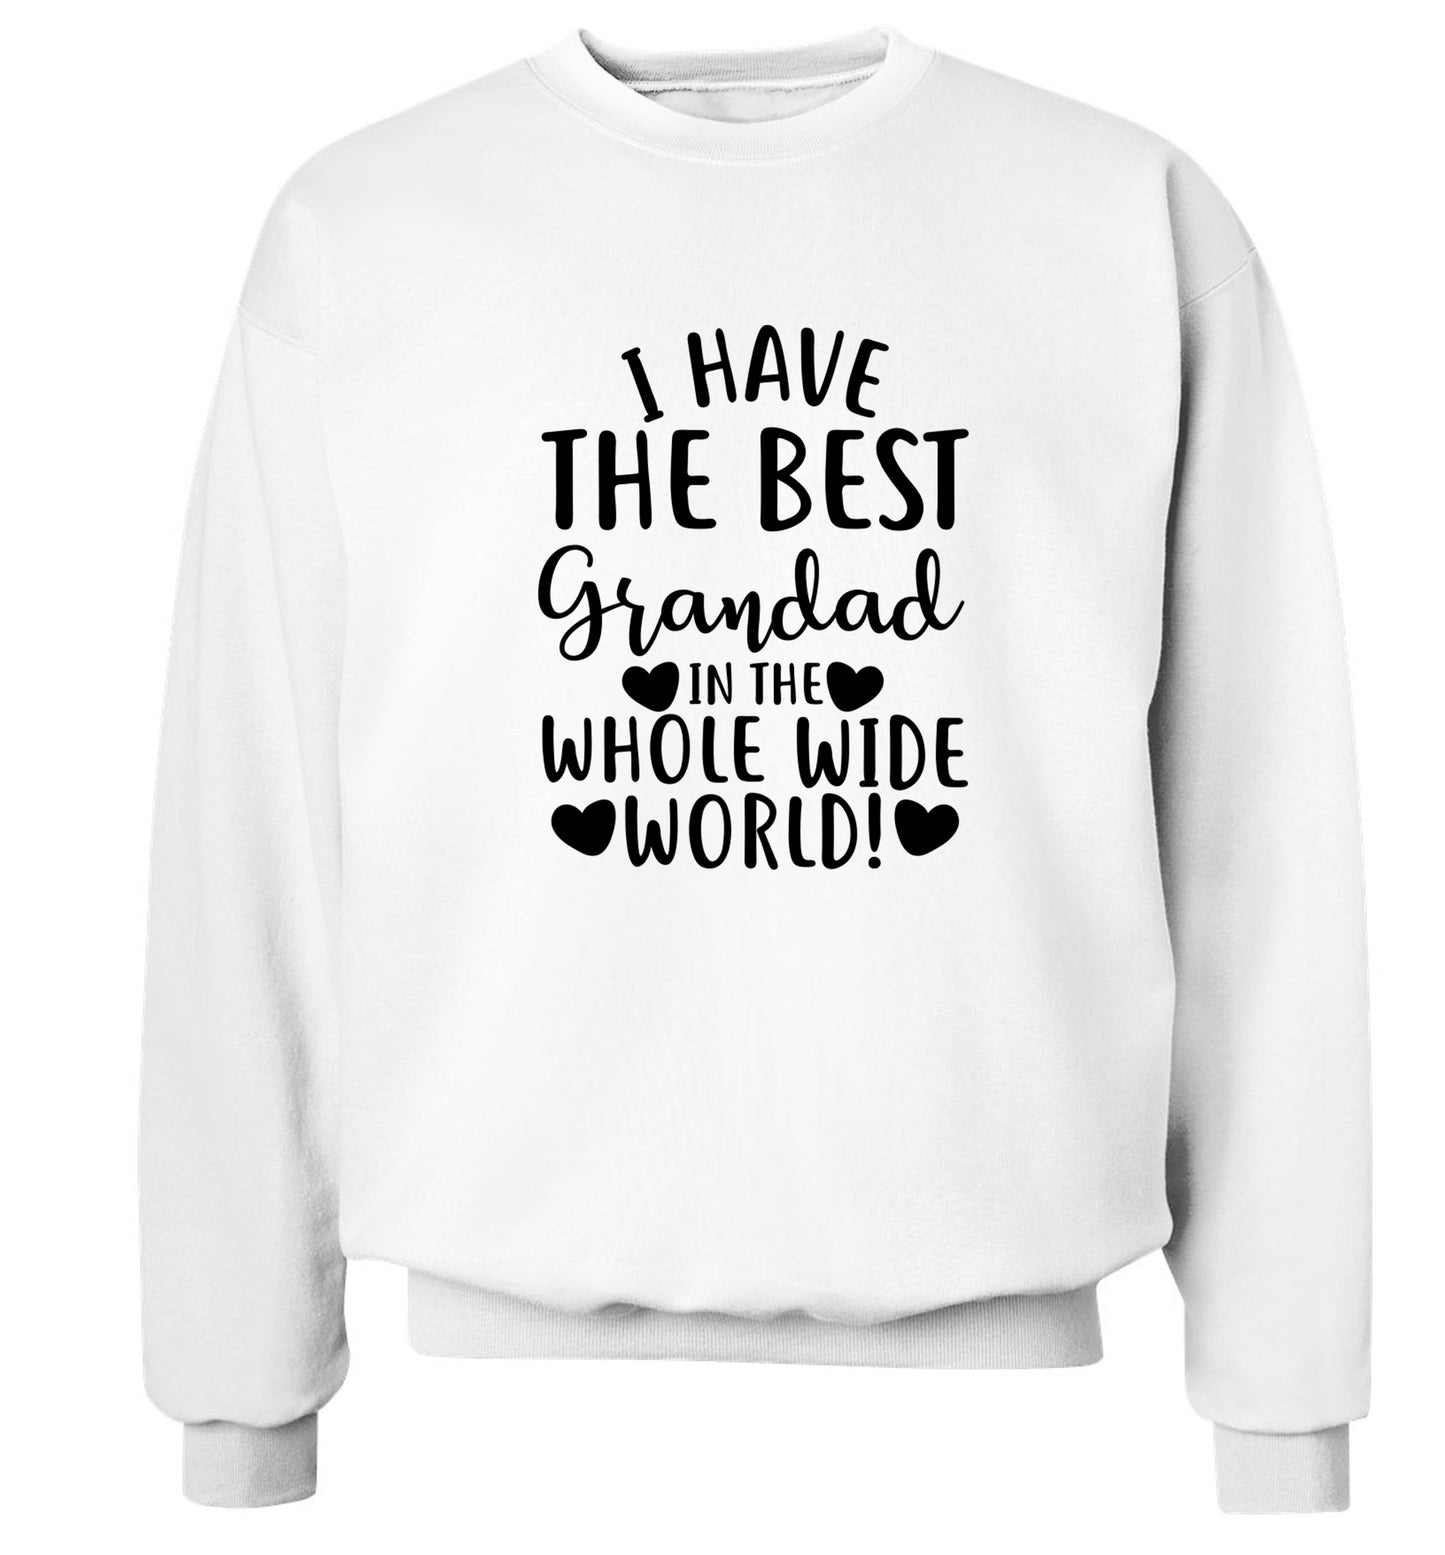 I have the best grandad in the whole wide world! Adult's unisex white Sweater 2XL